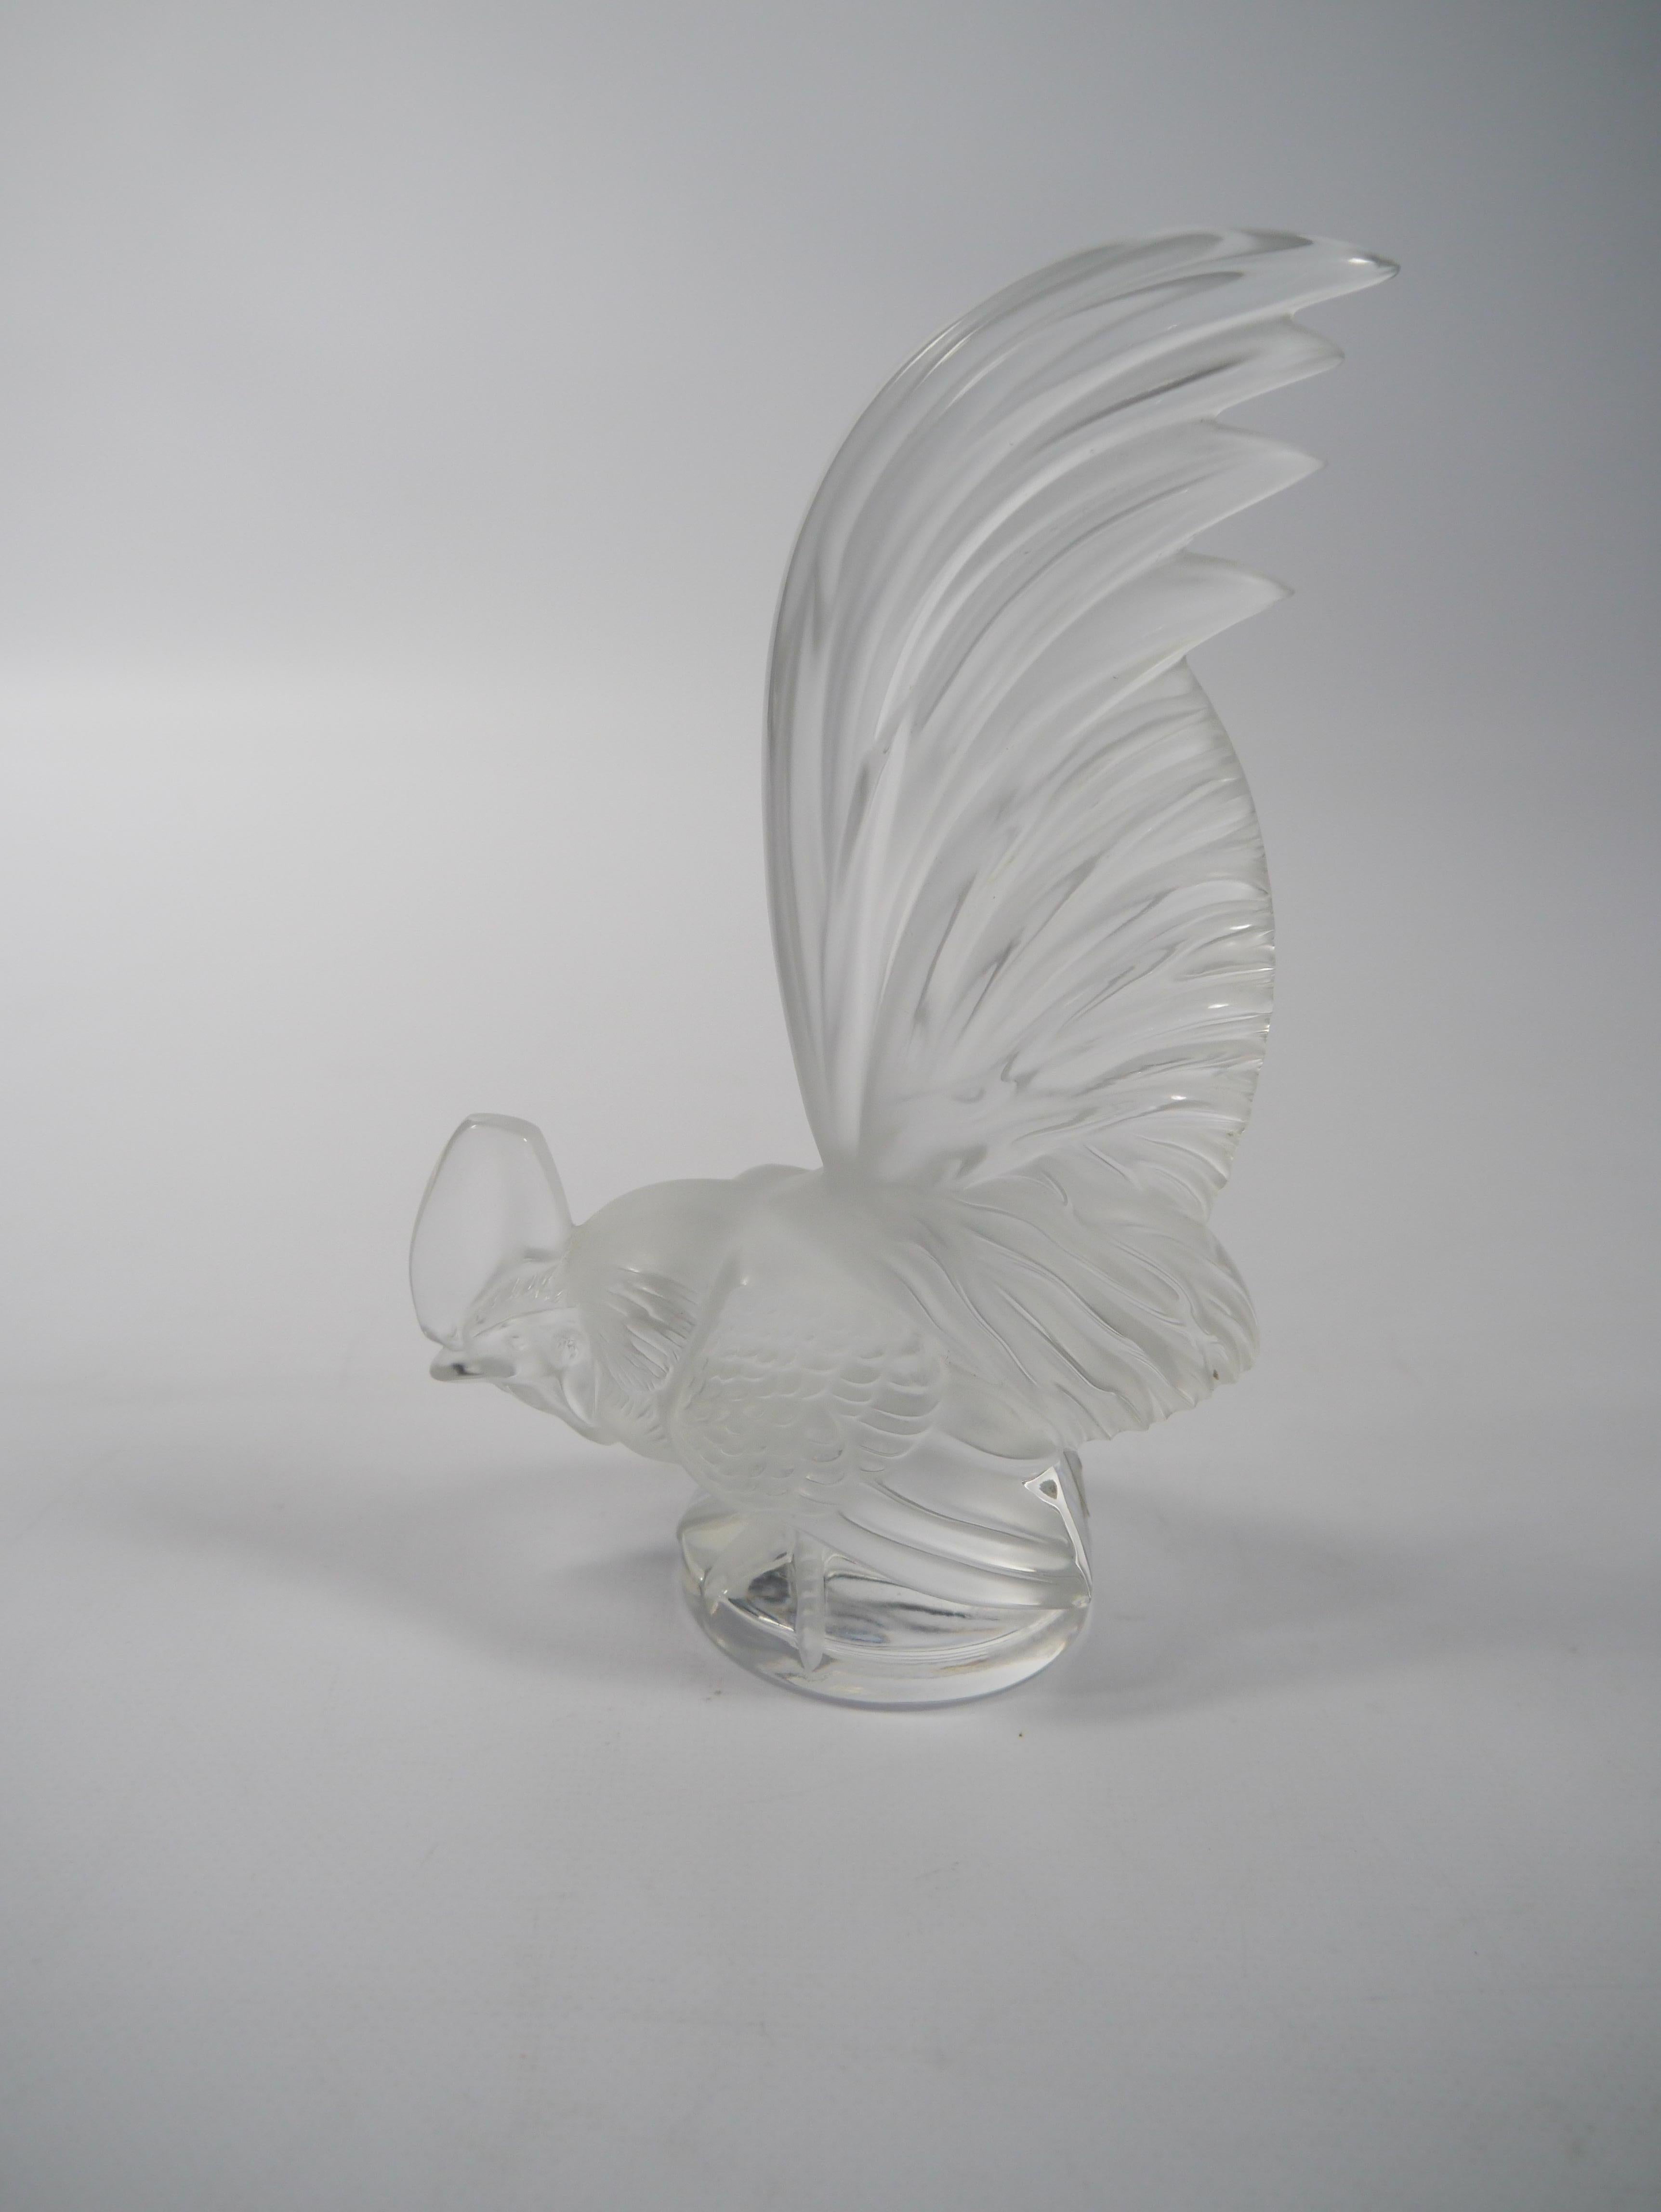 Rene Lalique hood ornament sculpture designed in 1928. This specific piece fabricated in the 1950s. Wears original sticker 